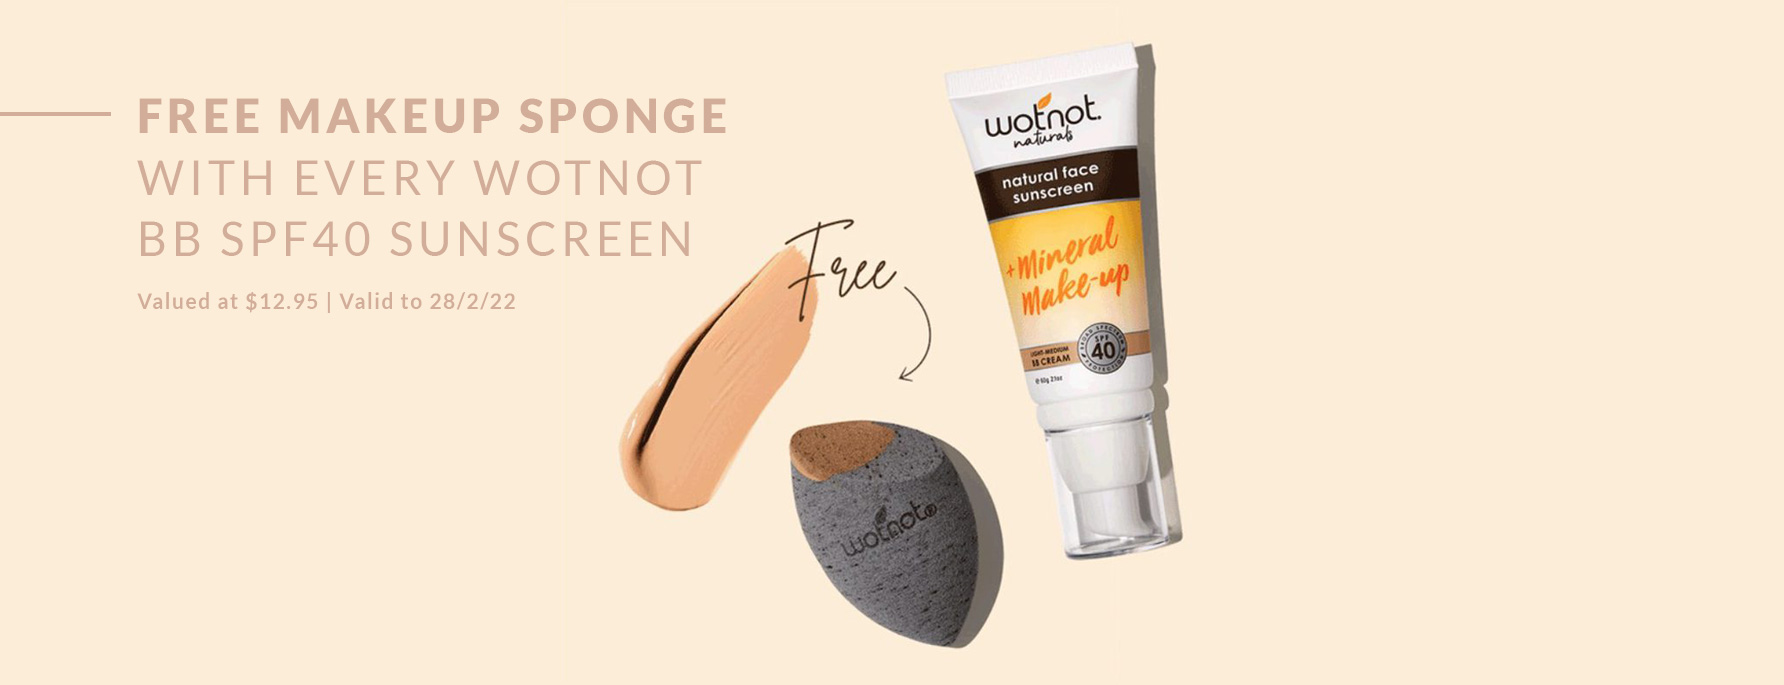 Free WOTNOT Beauty Sponge with every BB SPF40 Sunscreen Purchase